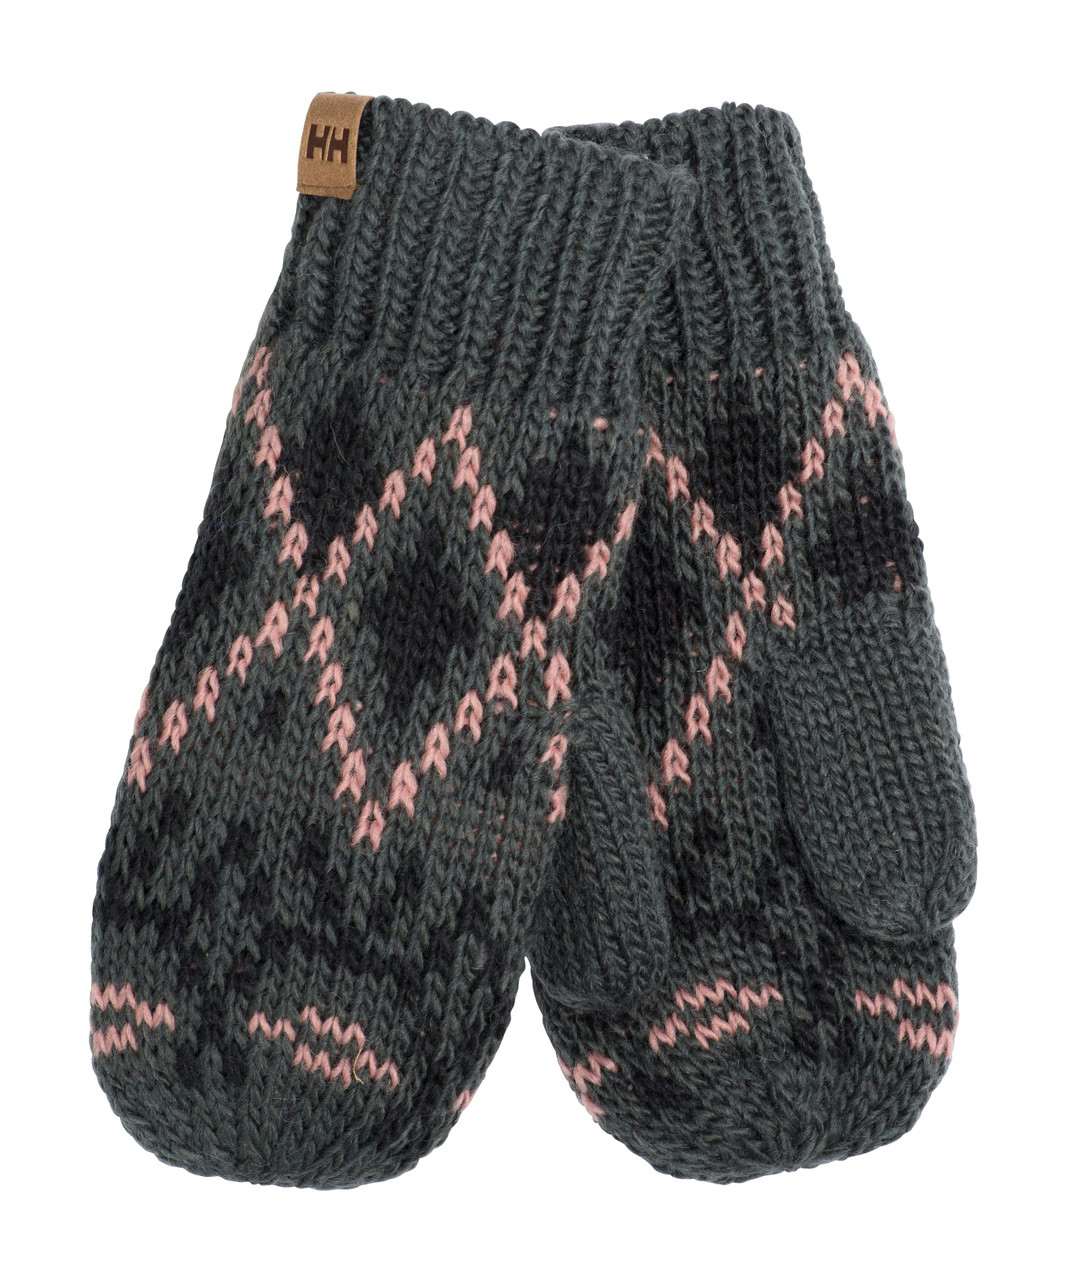 Heritage Knit Mitts Rock